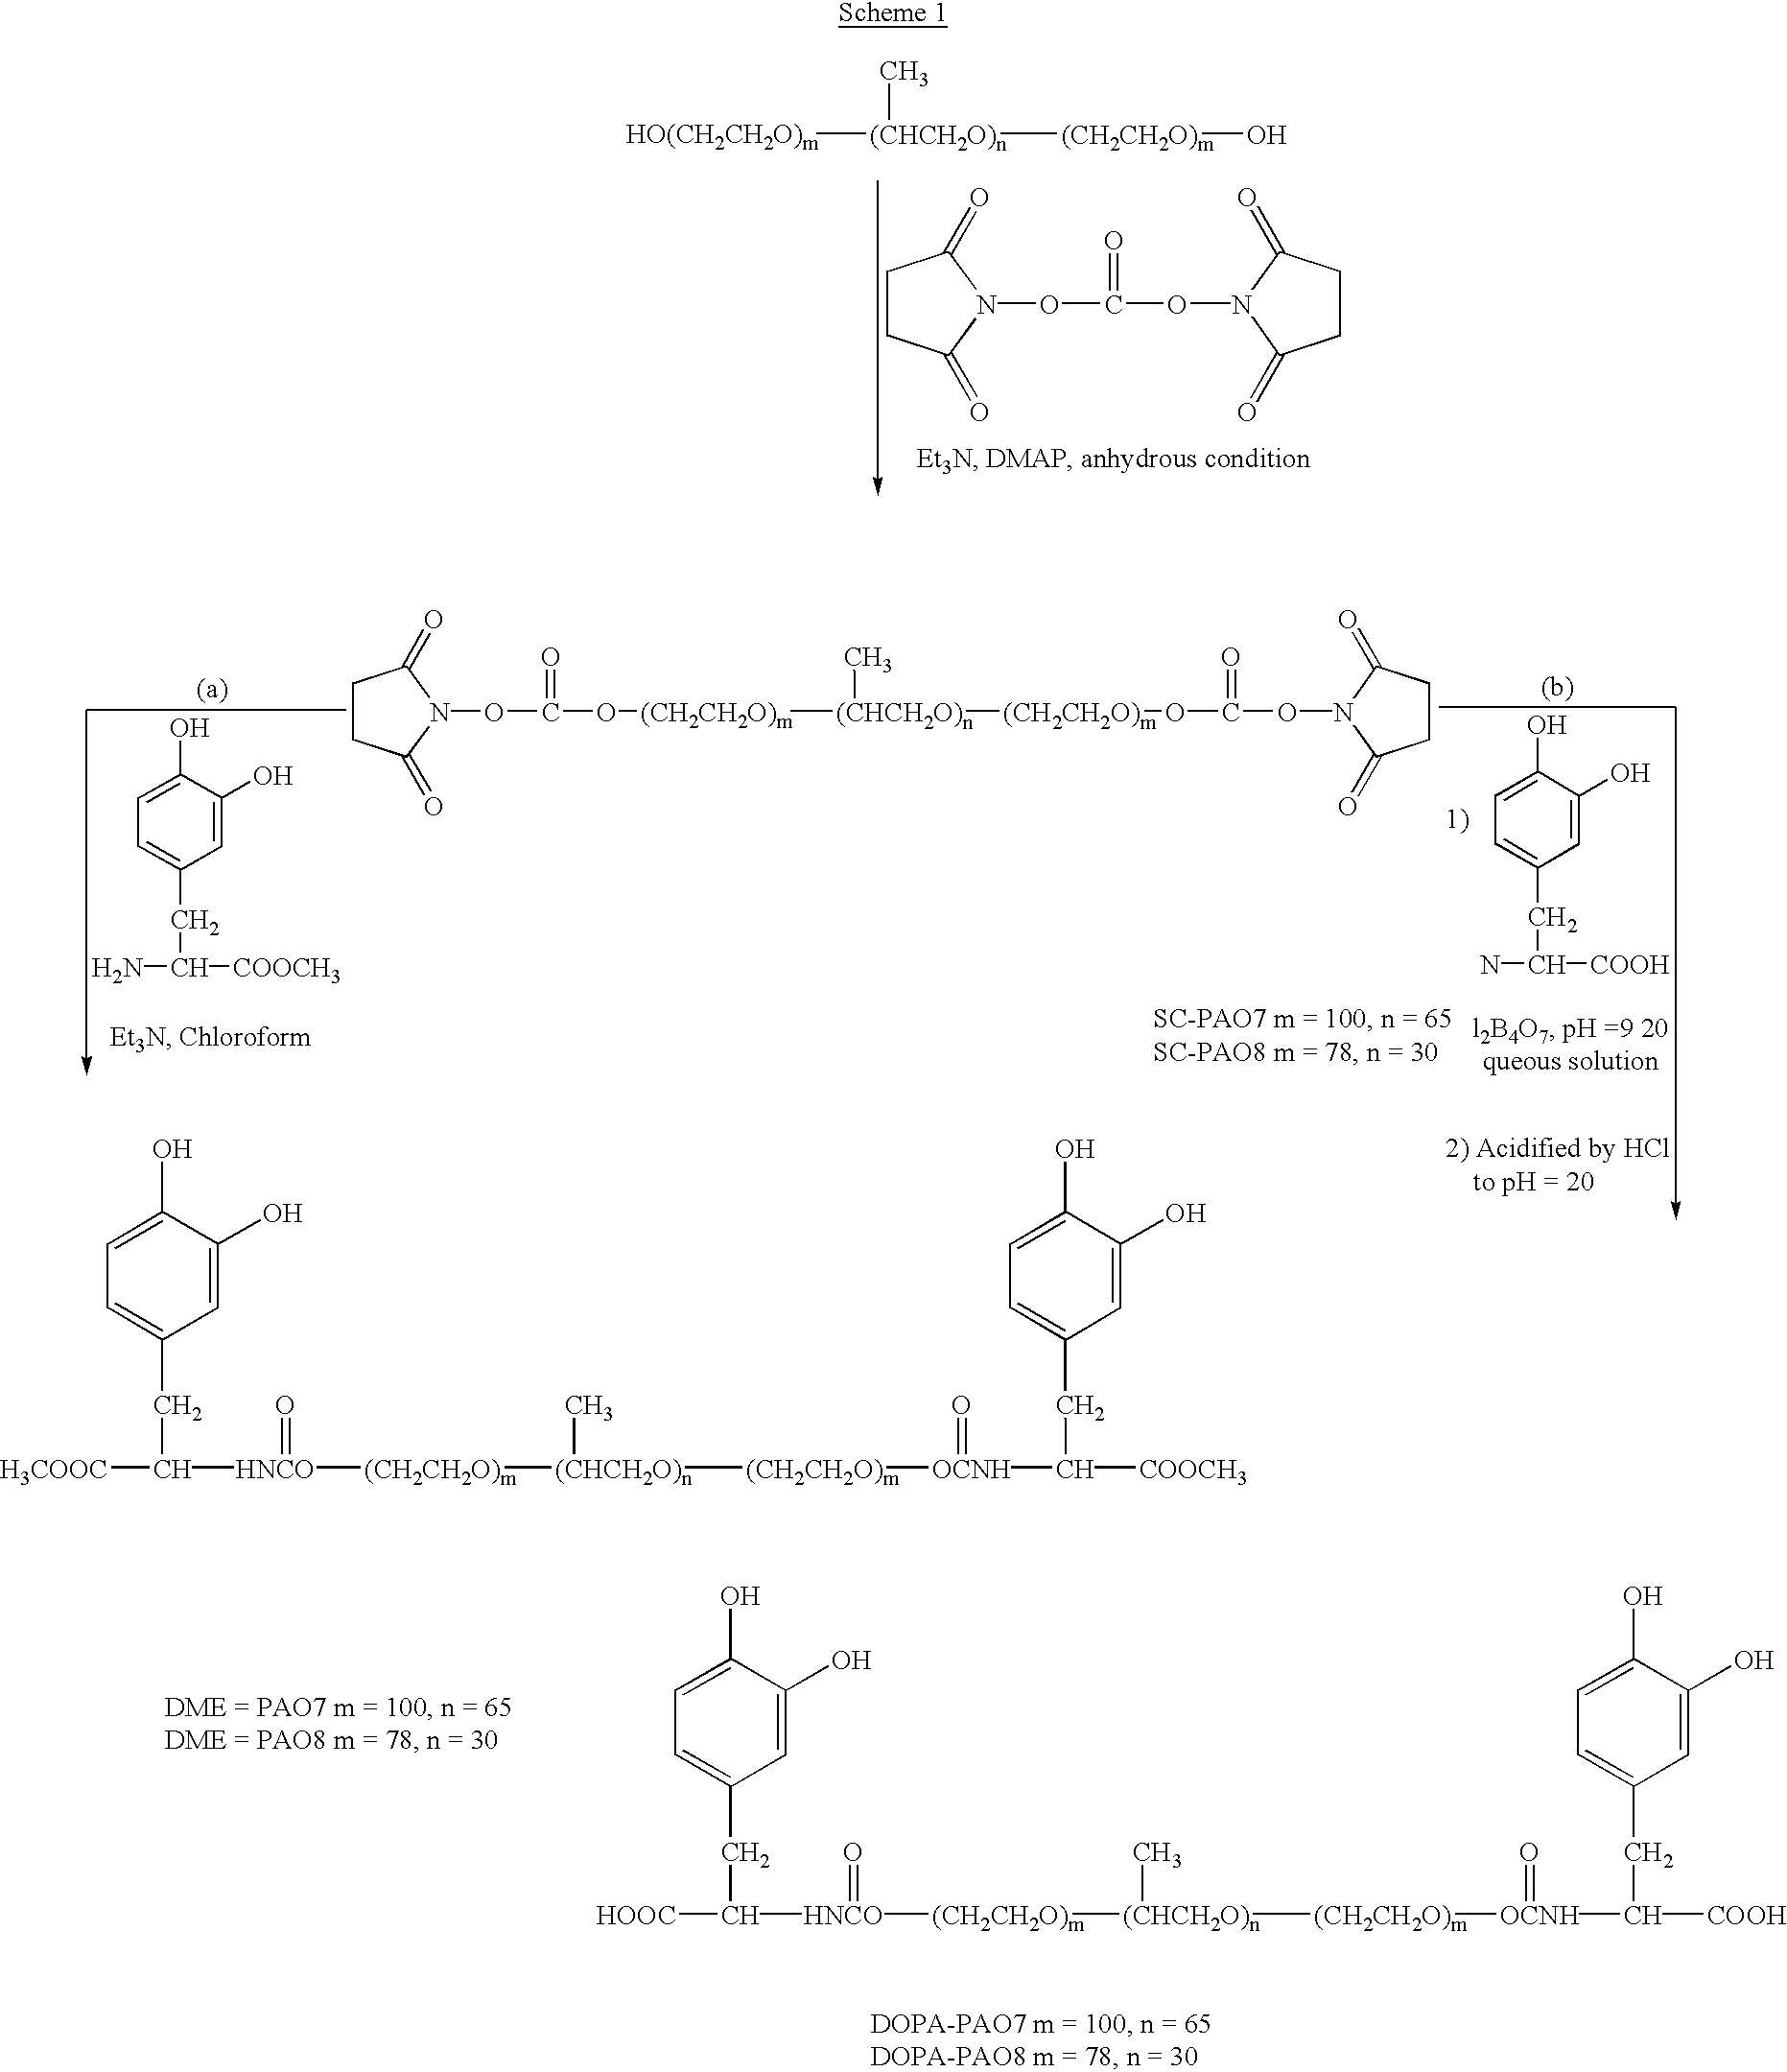 Adhesive DOPA-containing polymers and related methods of use